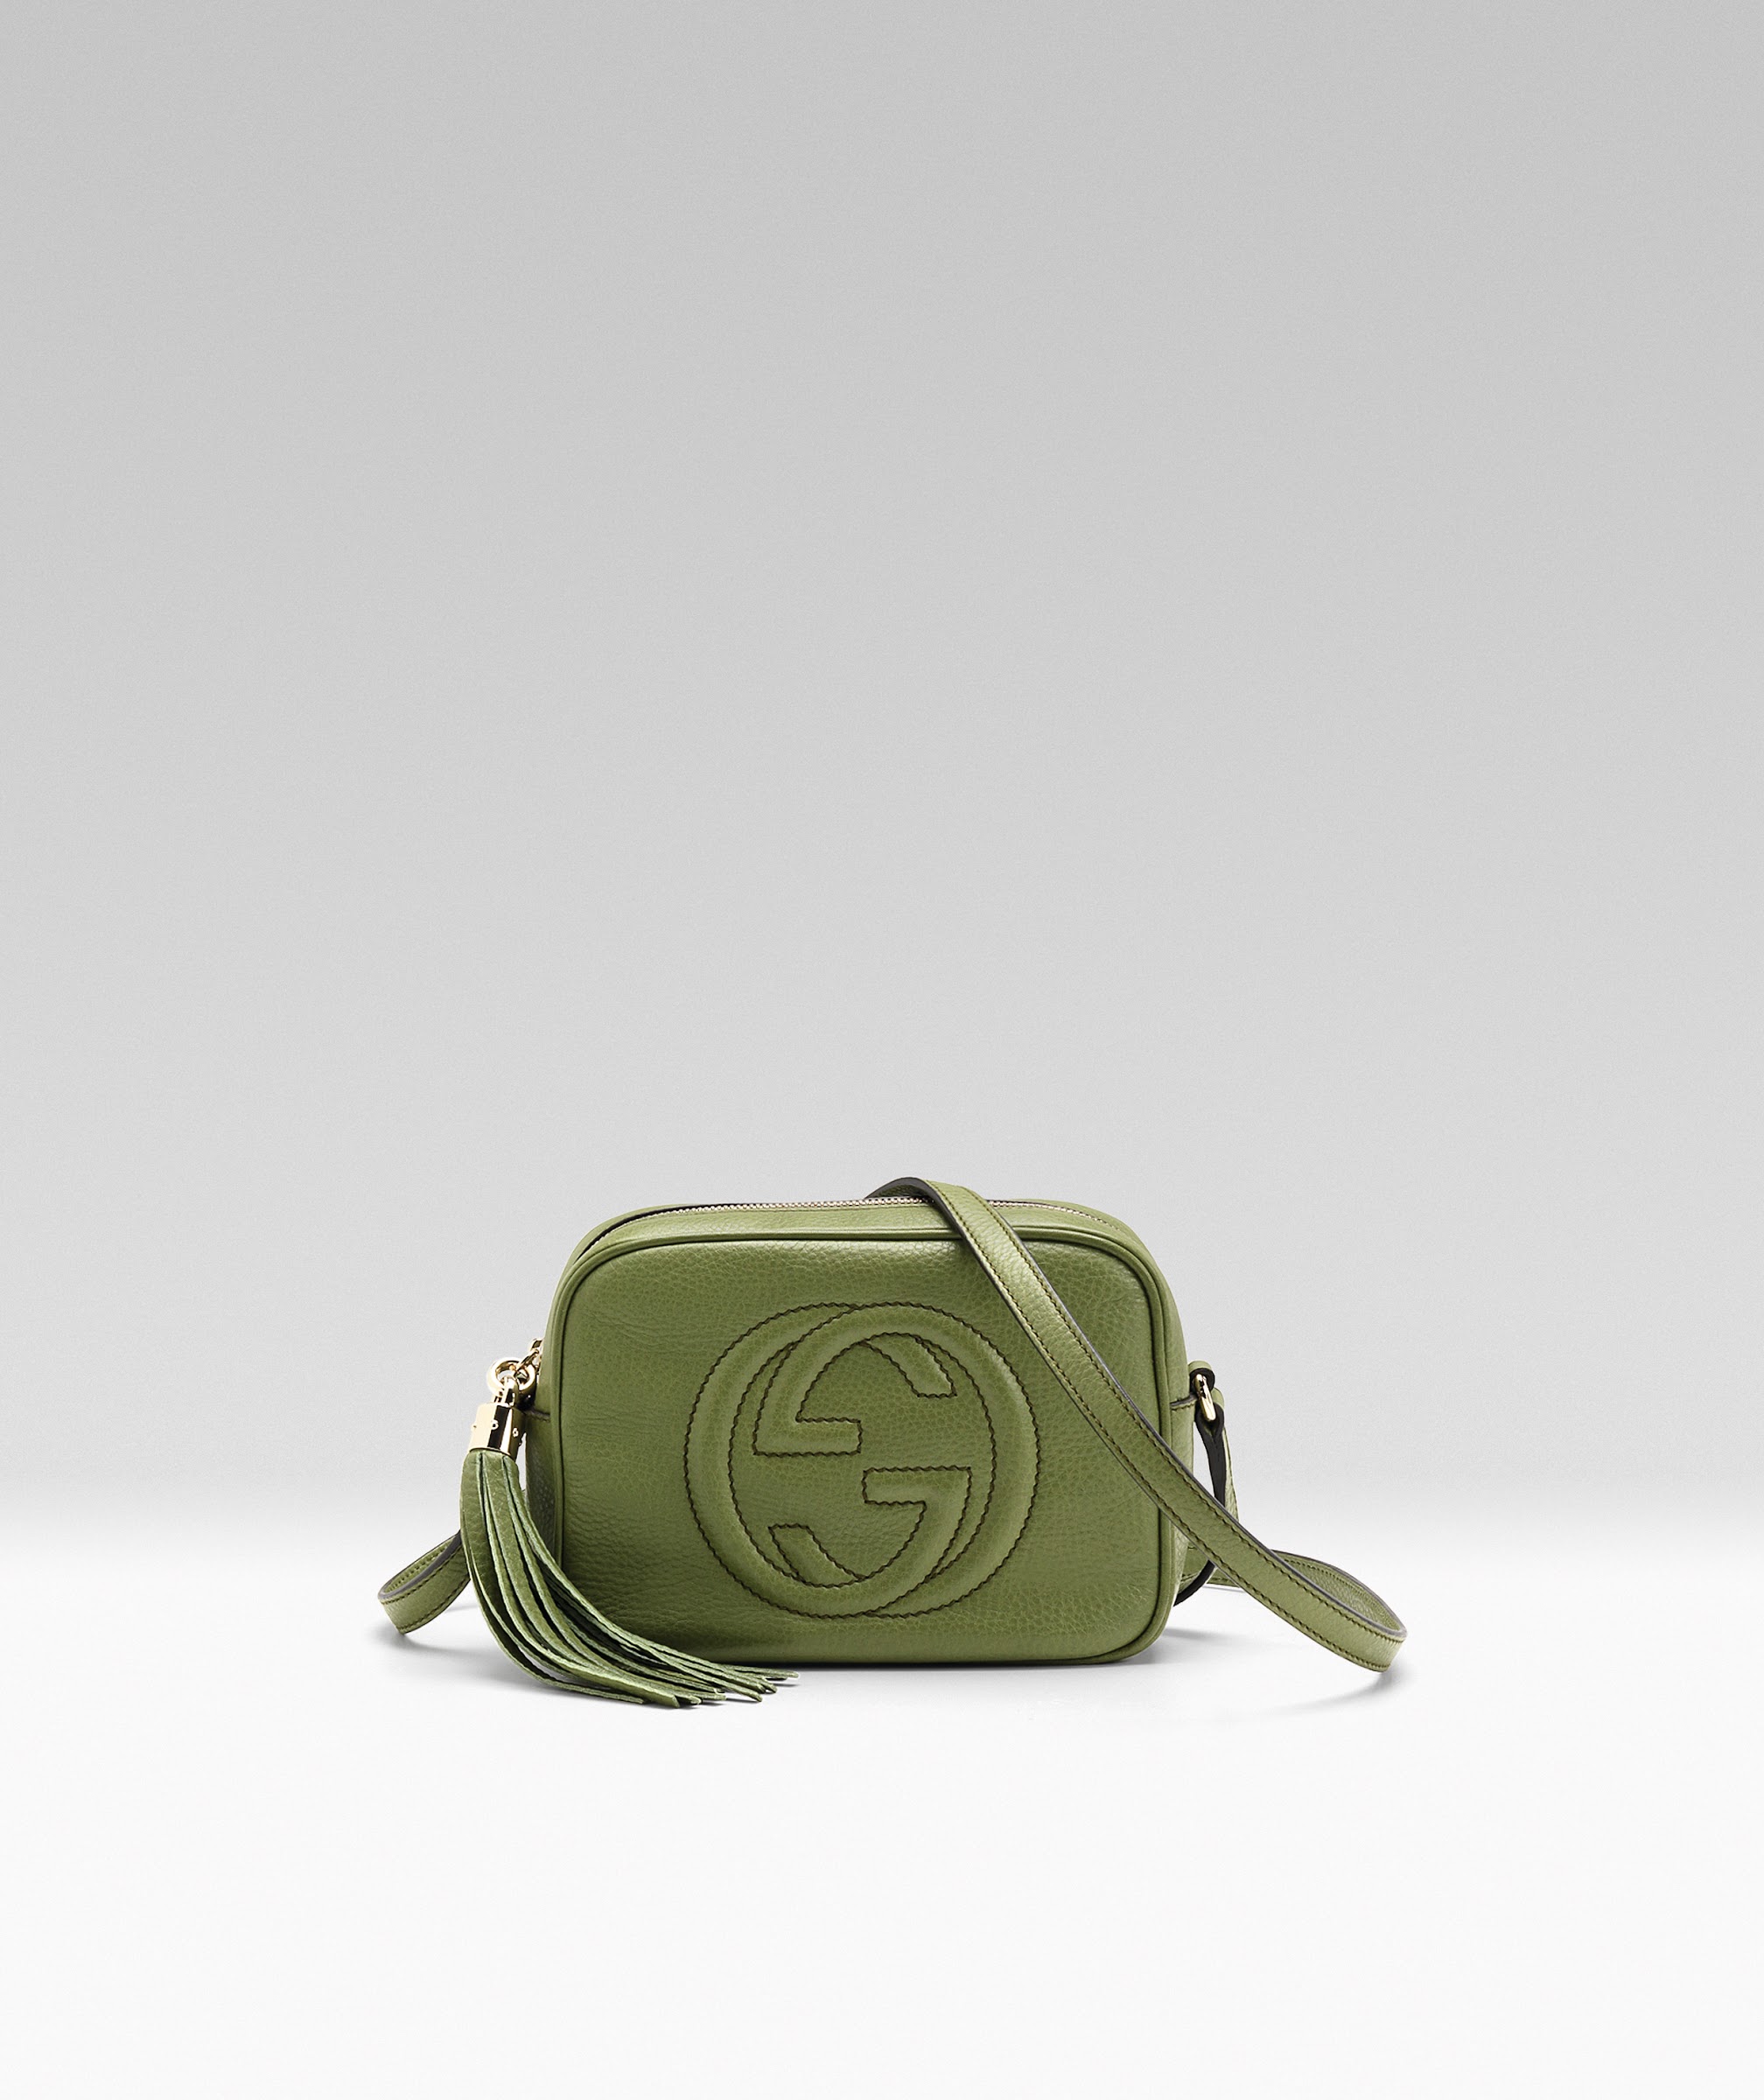 Gucci's Cruise 2013 Collection - BagAddicts Anonymous